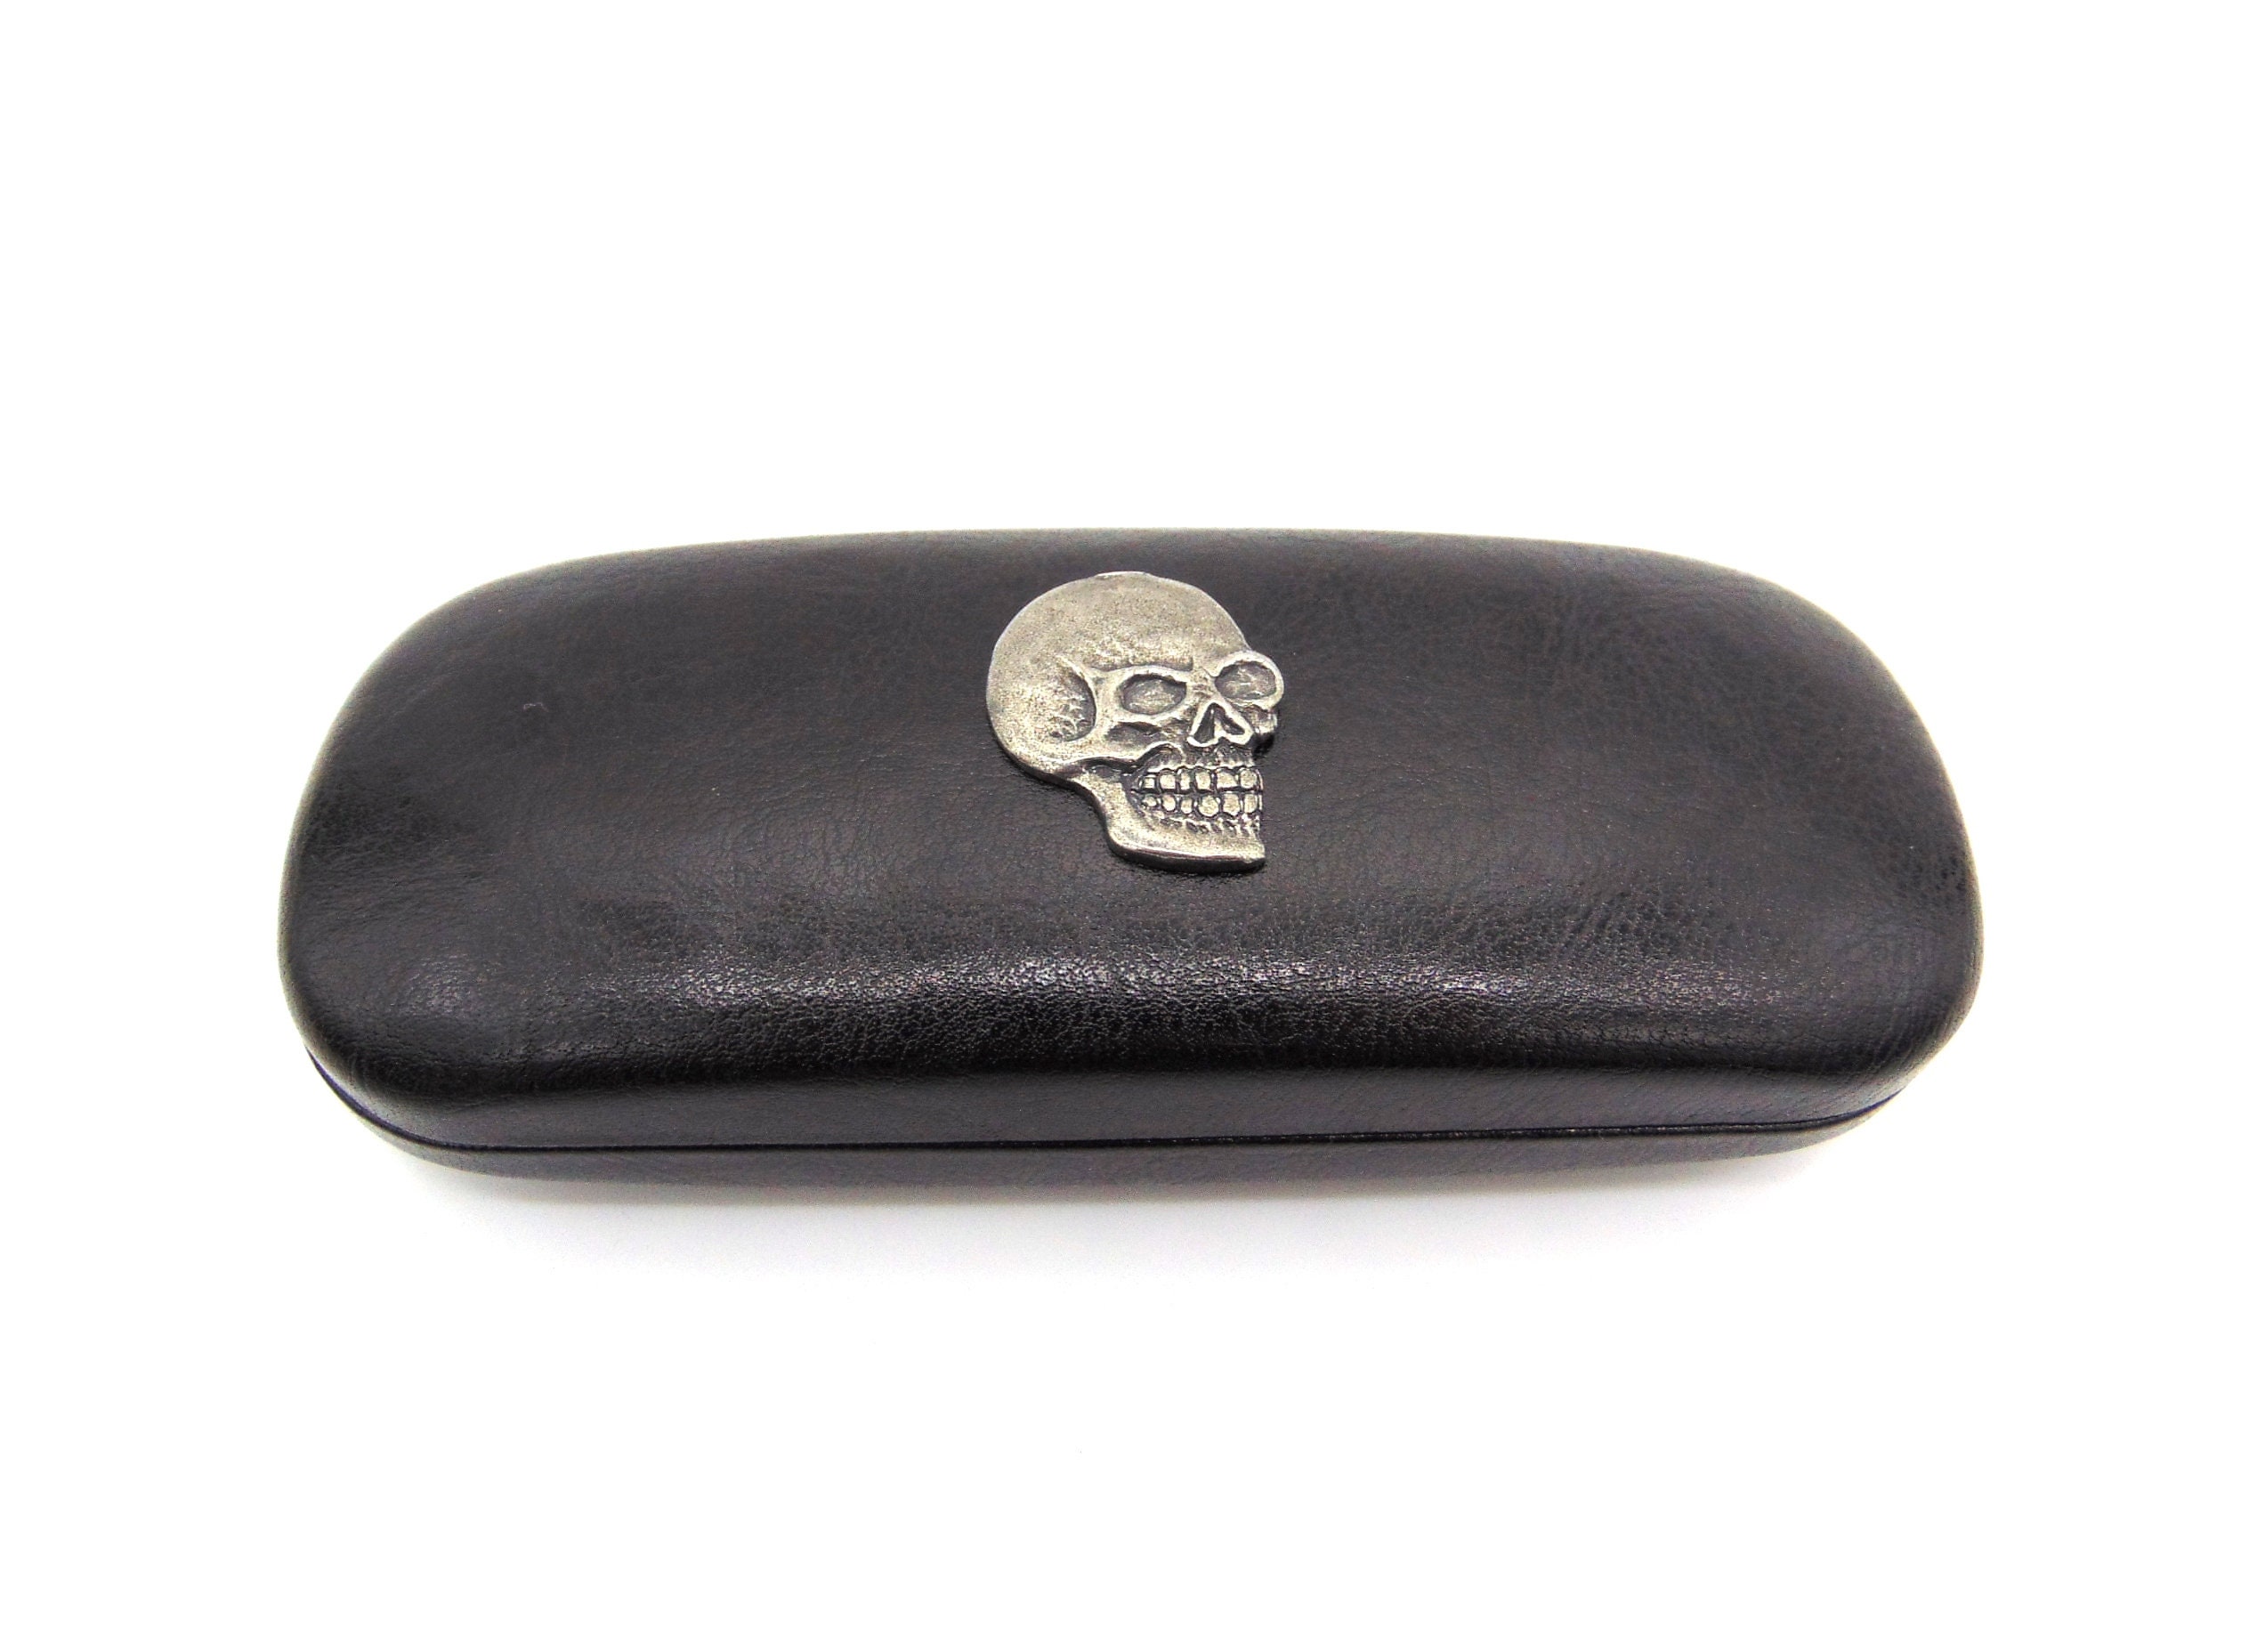 Personalised Silver Satin Finish Curved Metal Glasses Case - (Newcastle)